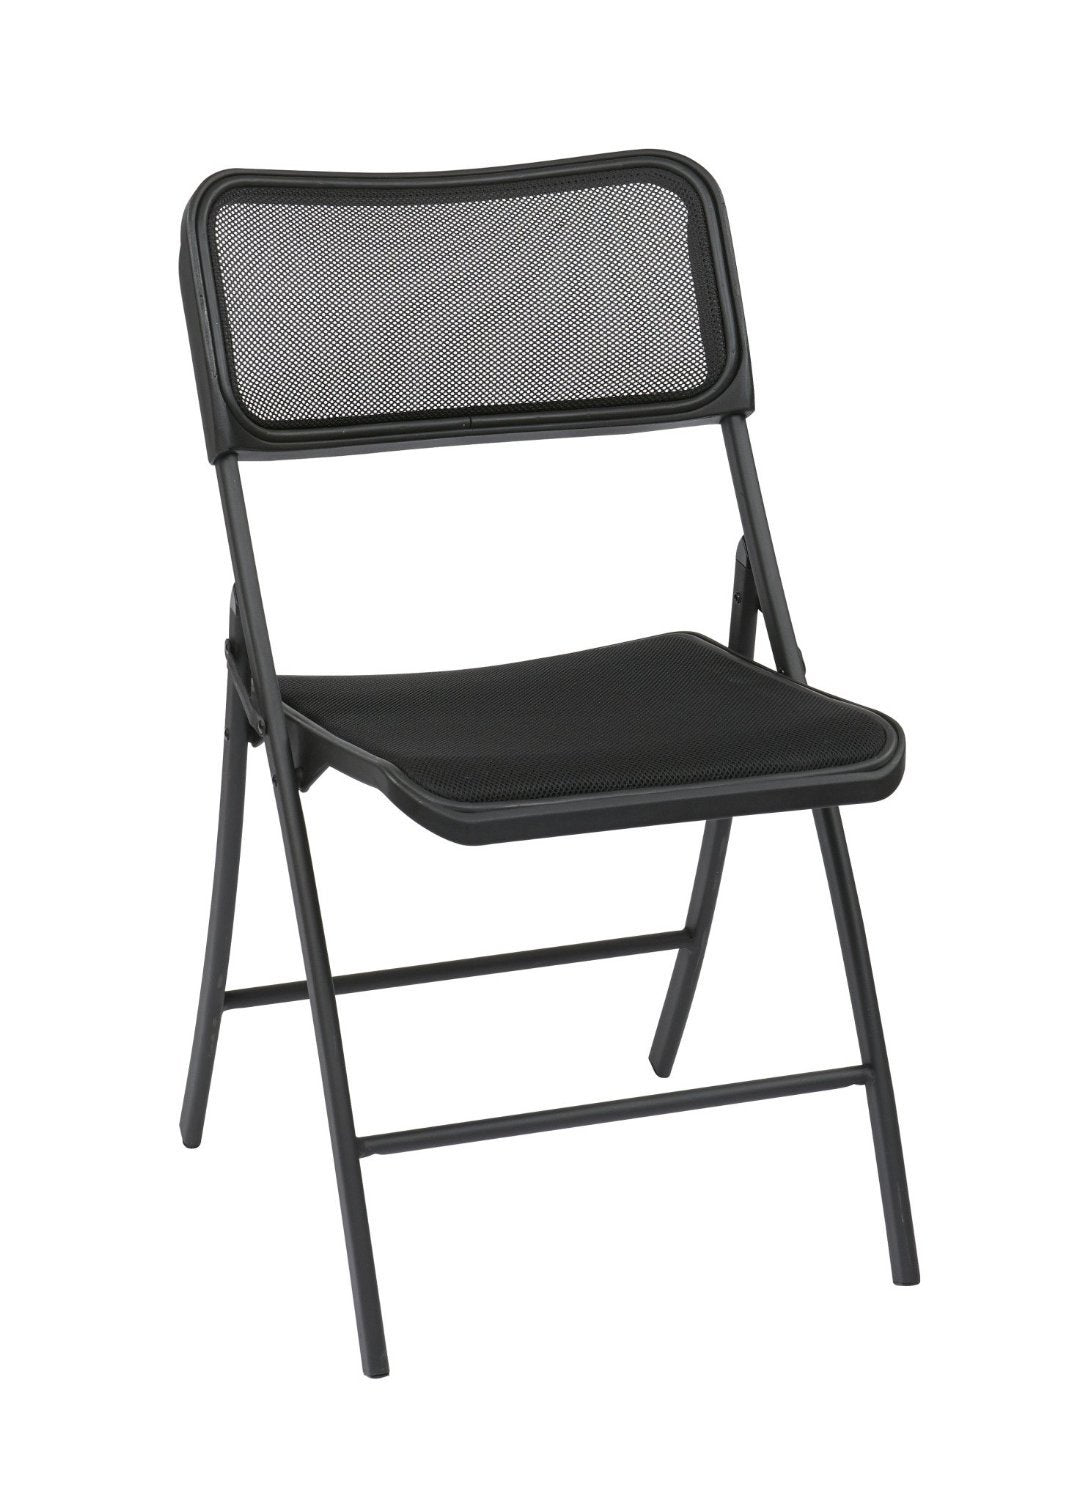 Work Smart Ff-223012 Folding Chair With Screen Seat And Back (2pcs/ctn)